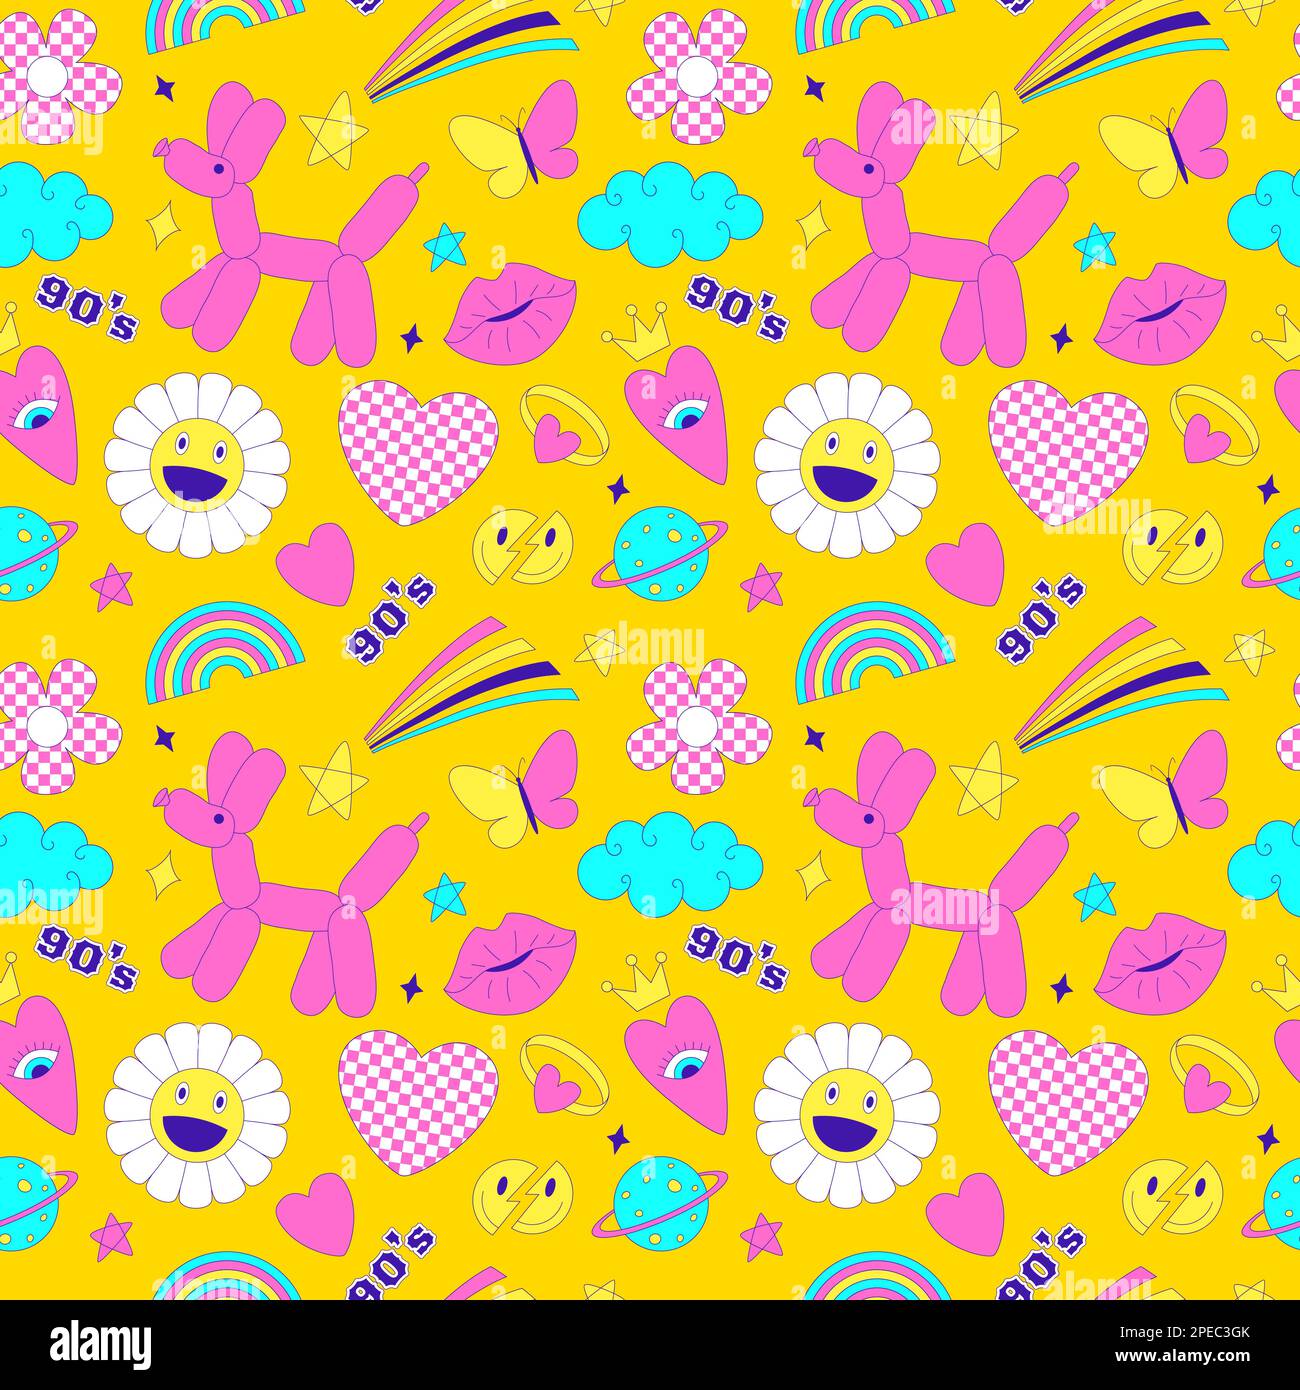 Seamless pattern with y2k style elements. Acidic vivid neon colors. Bright youth pattern with 90 s characters. Inflatable dog balloon, daisy, rainbow, Stock Vector